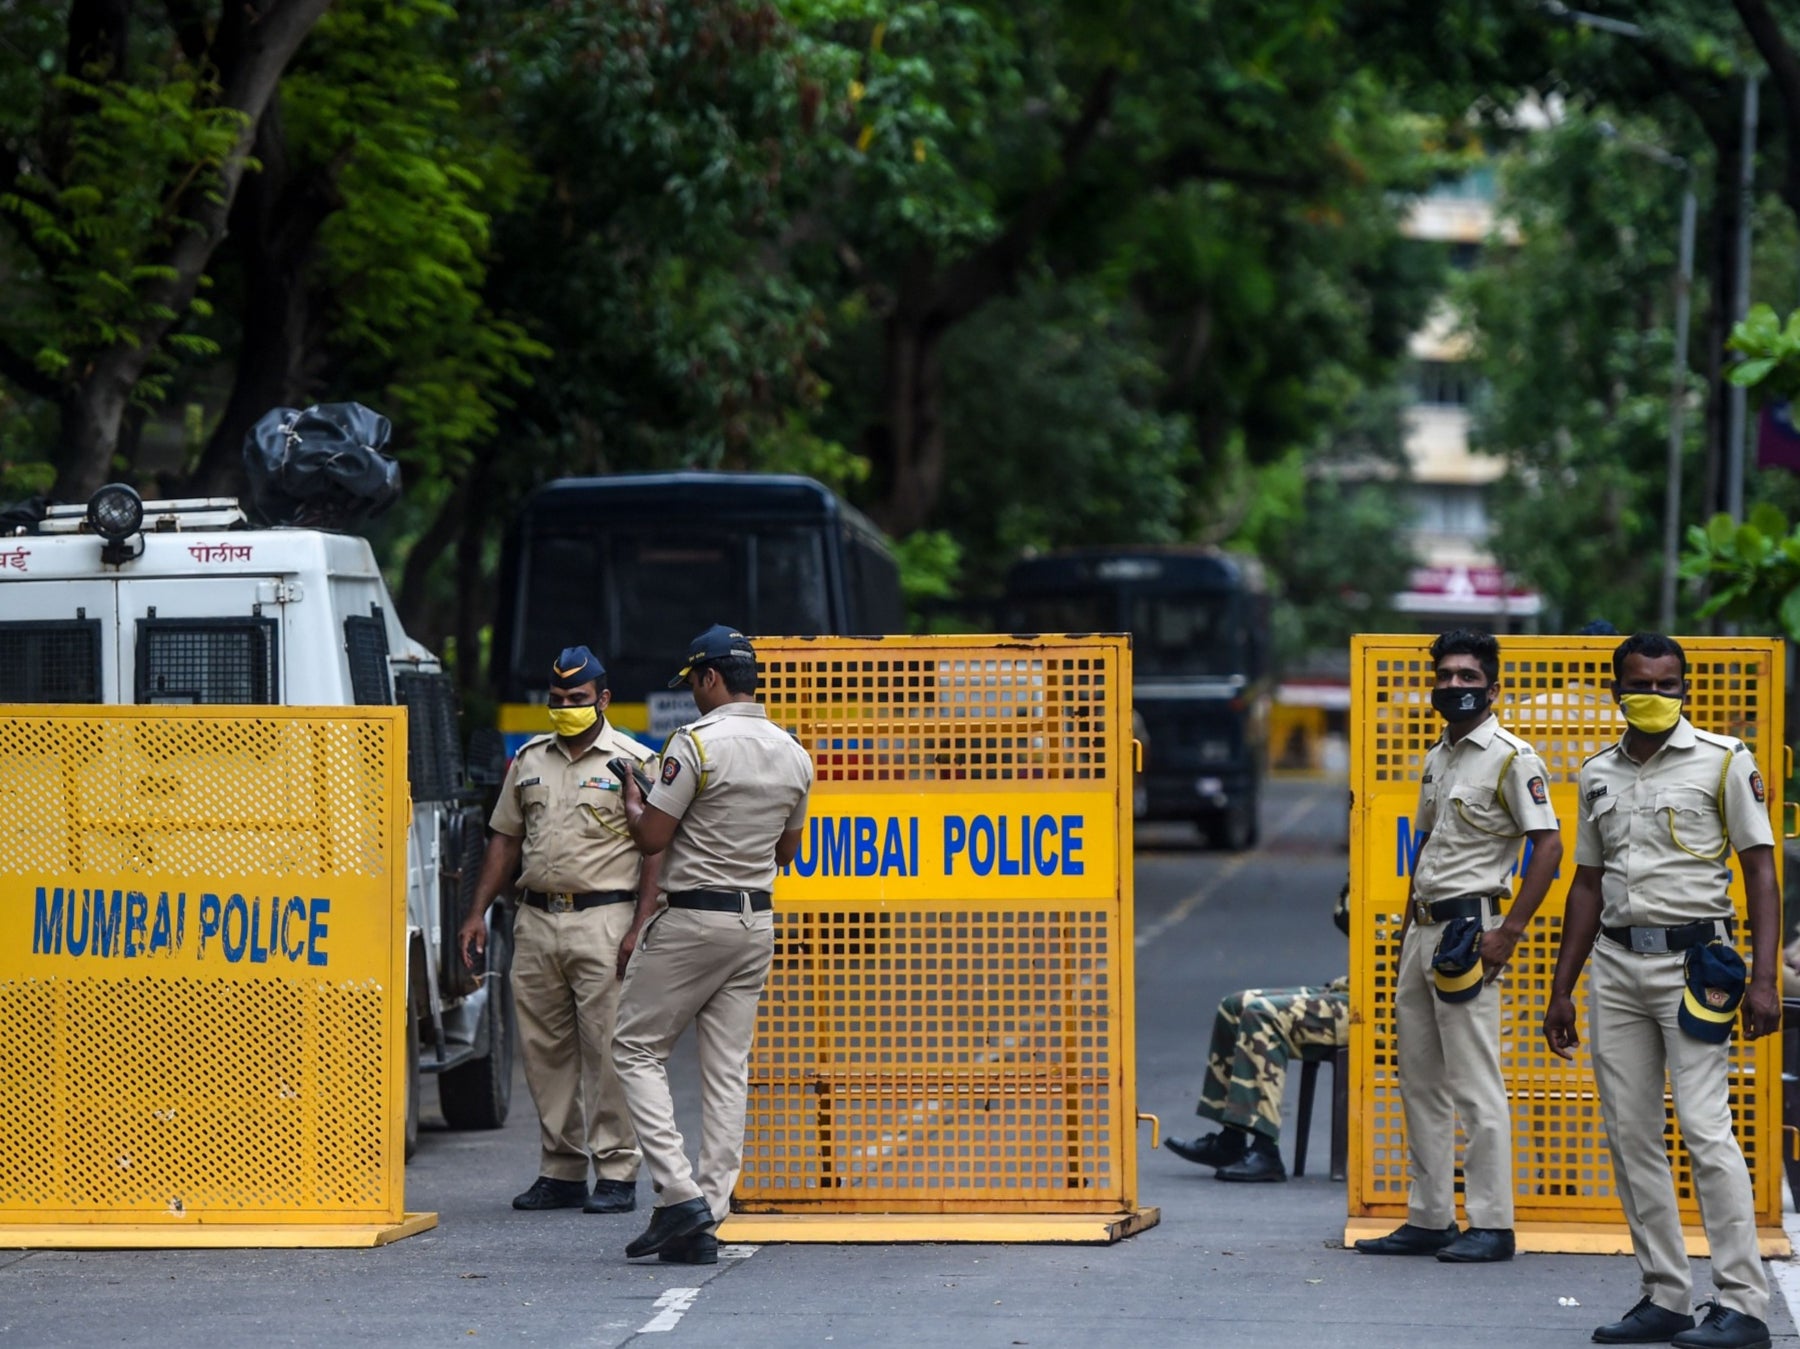 Police stand guard outside the Consulate General of China in Mumbai in June after a violent border brawl that left at least 20 Indian soldiers dead